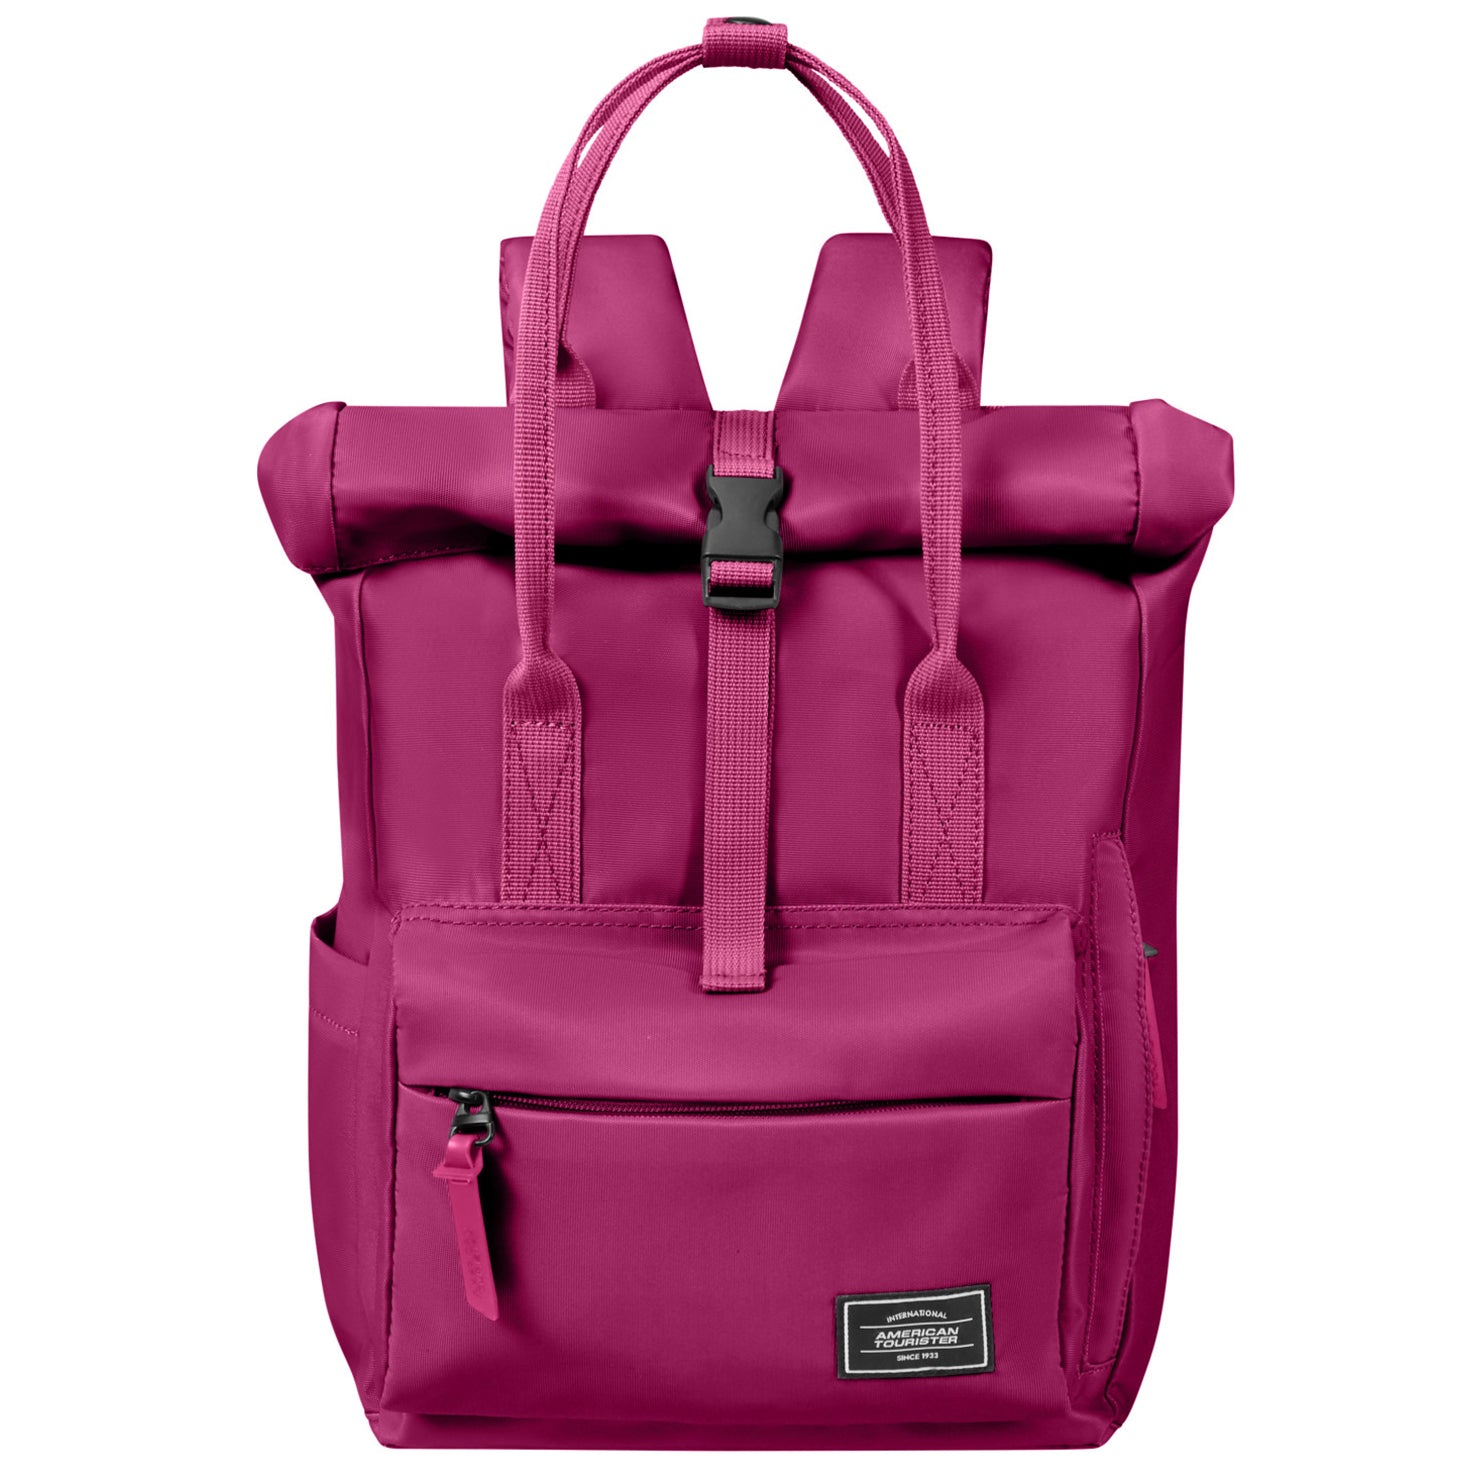 American Tourister Urban Groove City Rucksack 36 cm - Deep Orchid